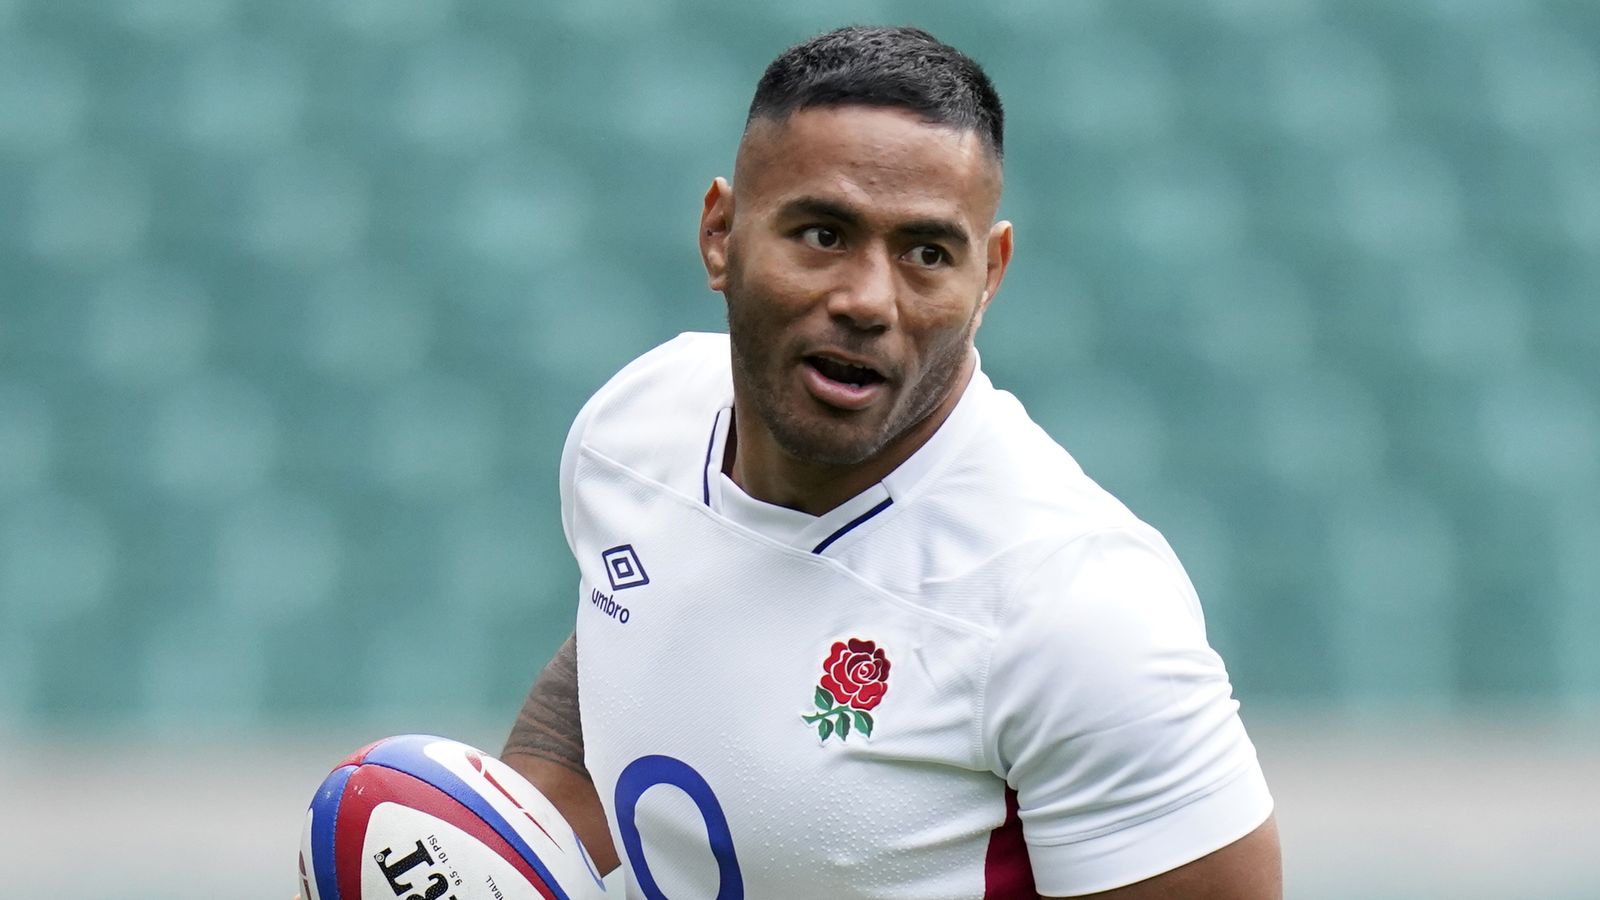 Manu Tuilagi: England centre ruled out of Australia tour after surgery on knee